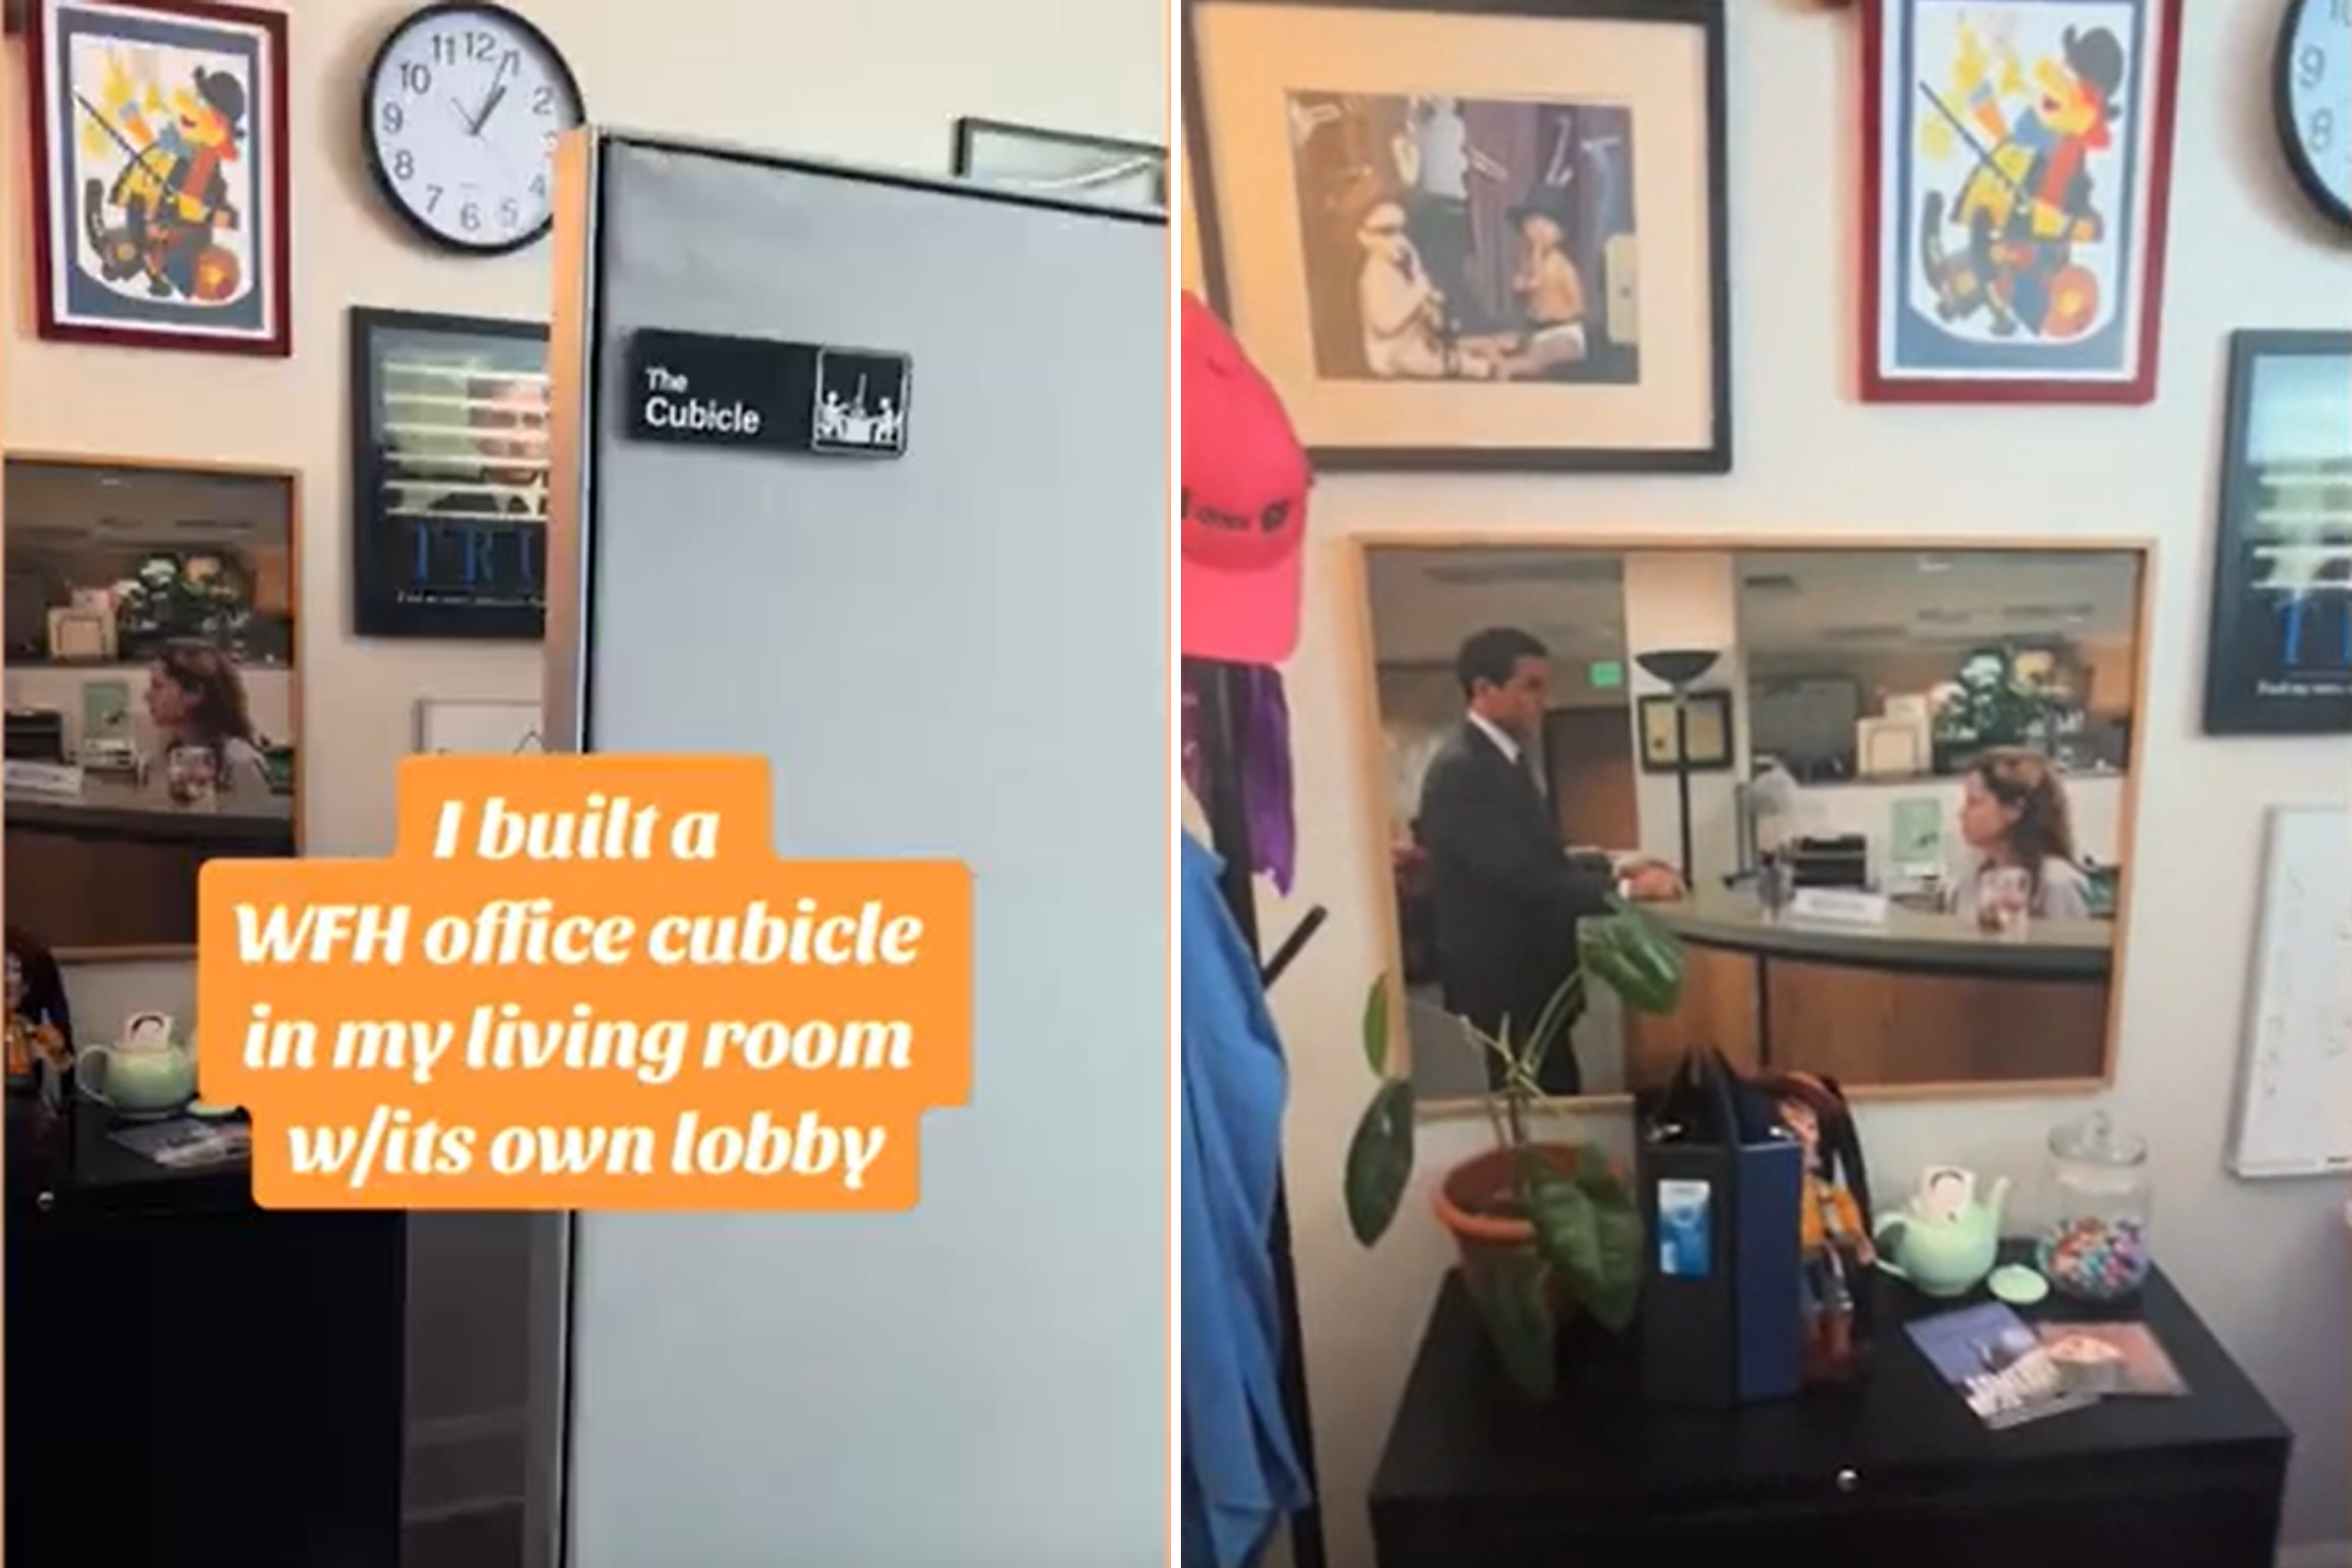 Woman spends $3,000 recreating "The Office" as her work-from-home cubicle